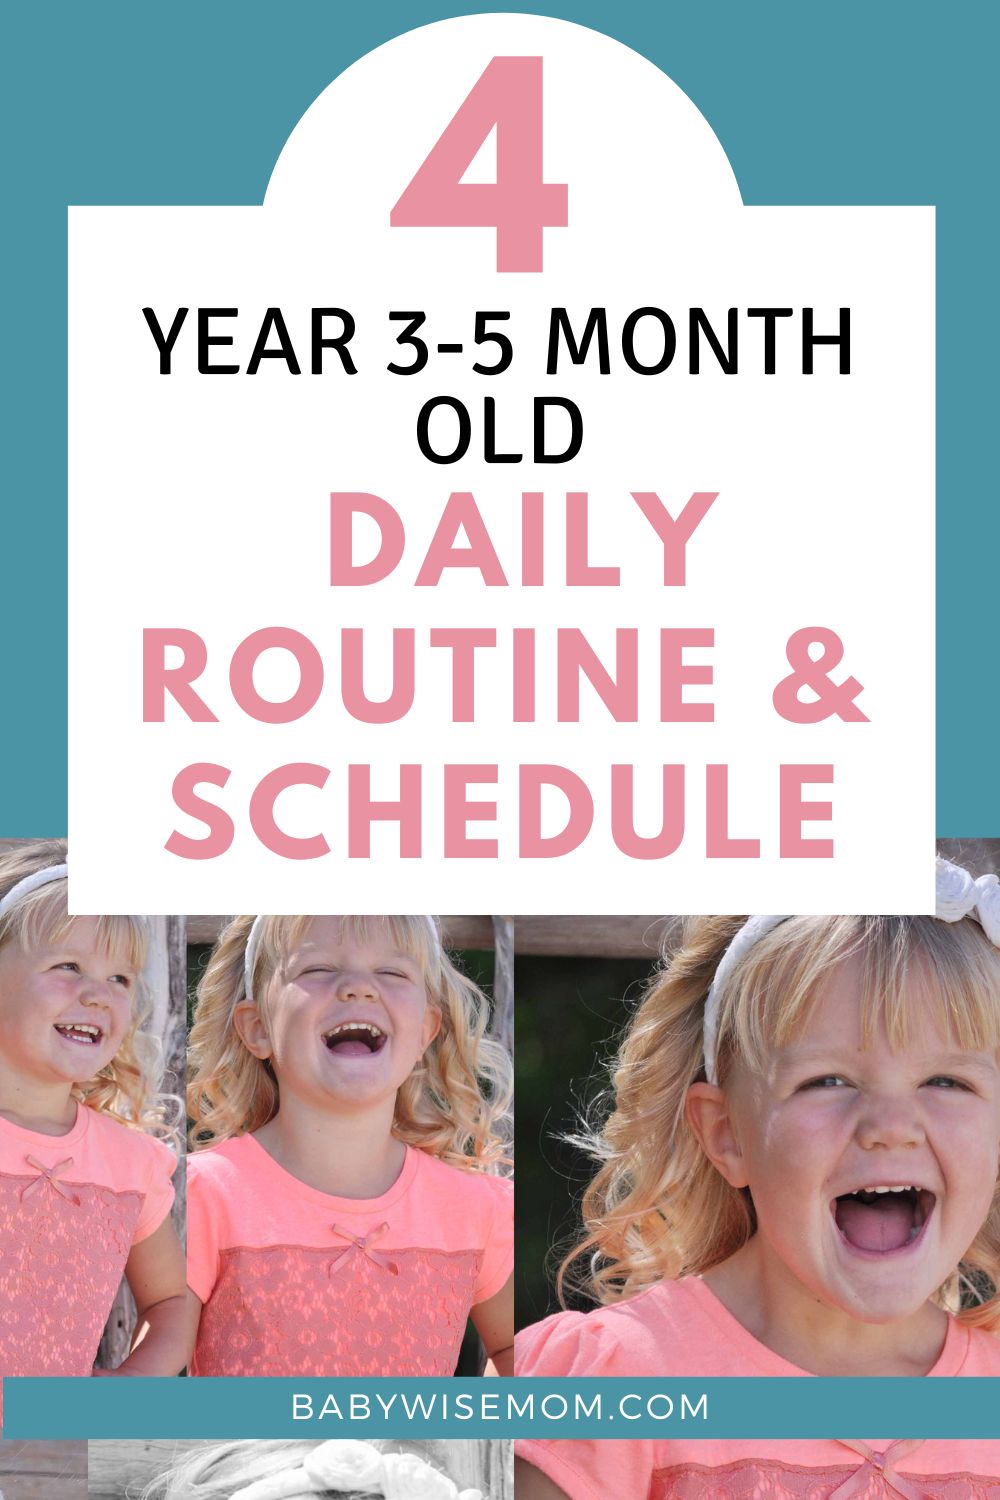 4 years and 3-5 month old schedule and routine